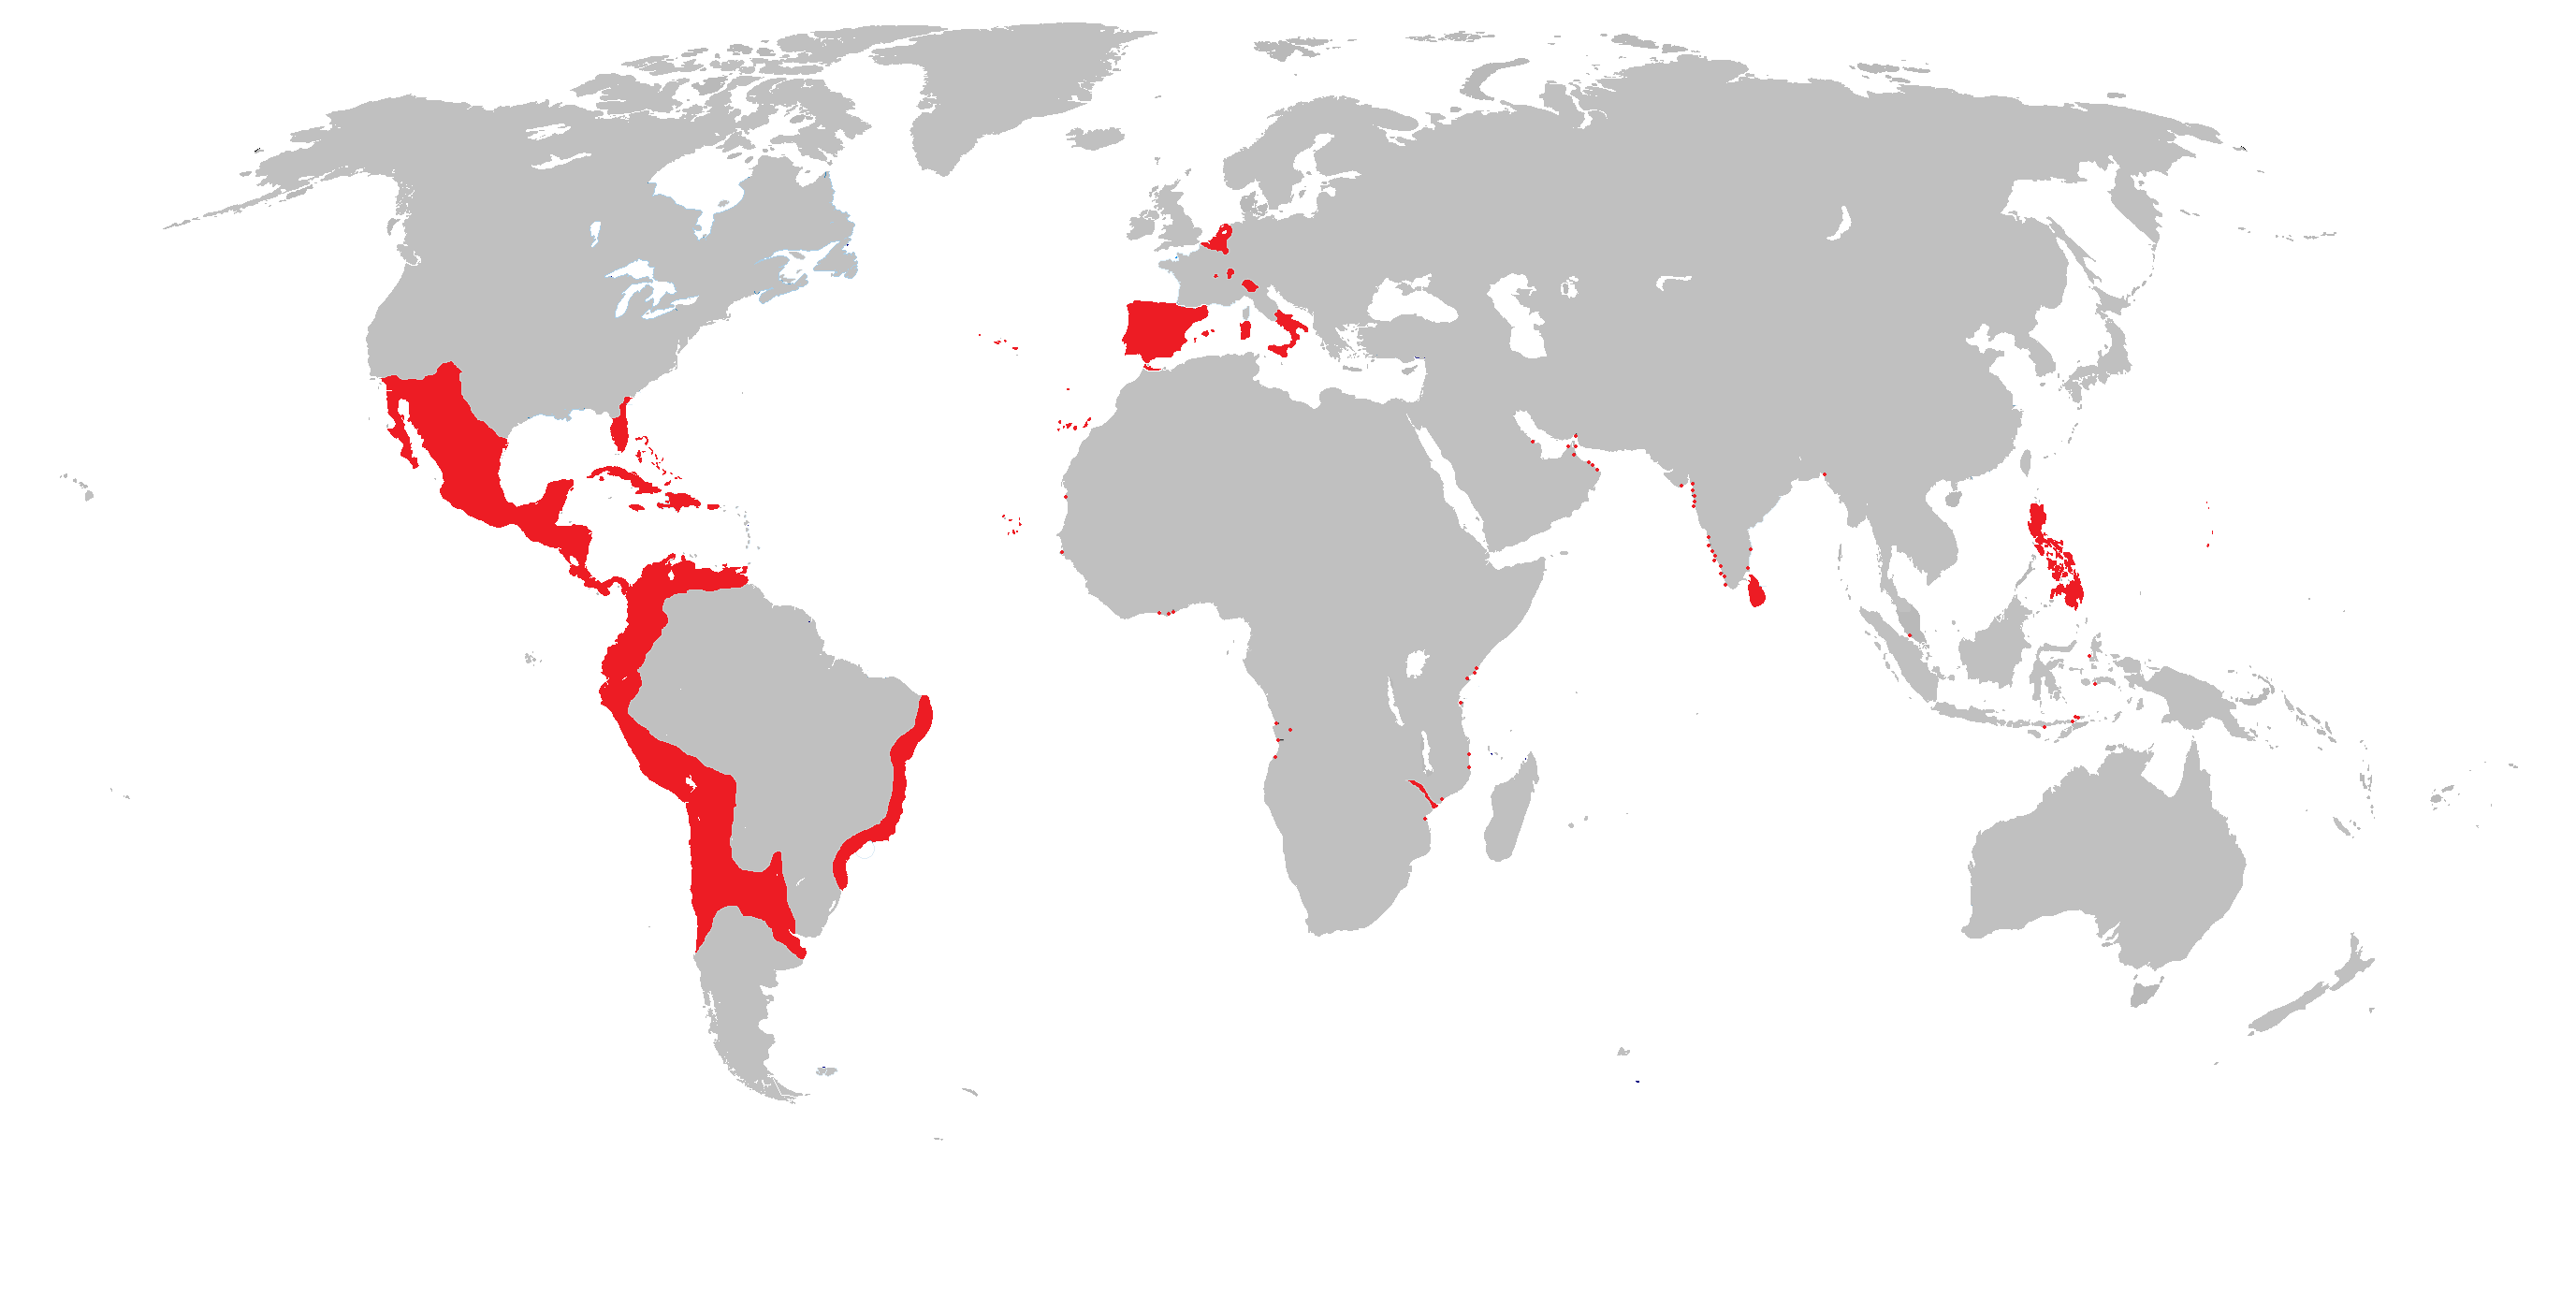 The Spanish Empire under the rule of Philip Habsburg (1556–1598)